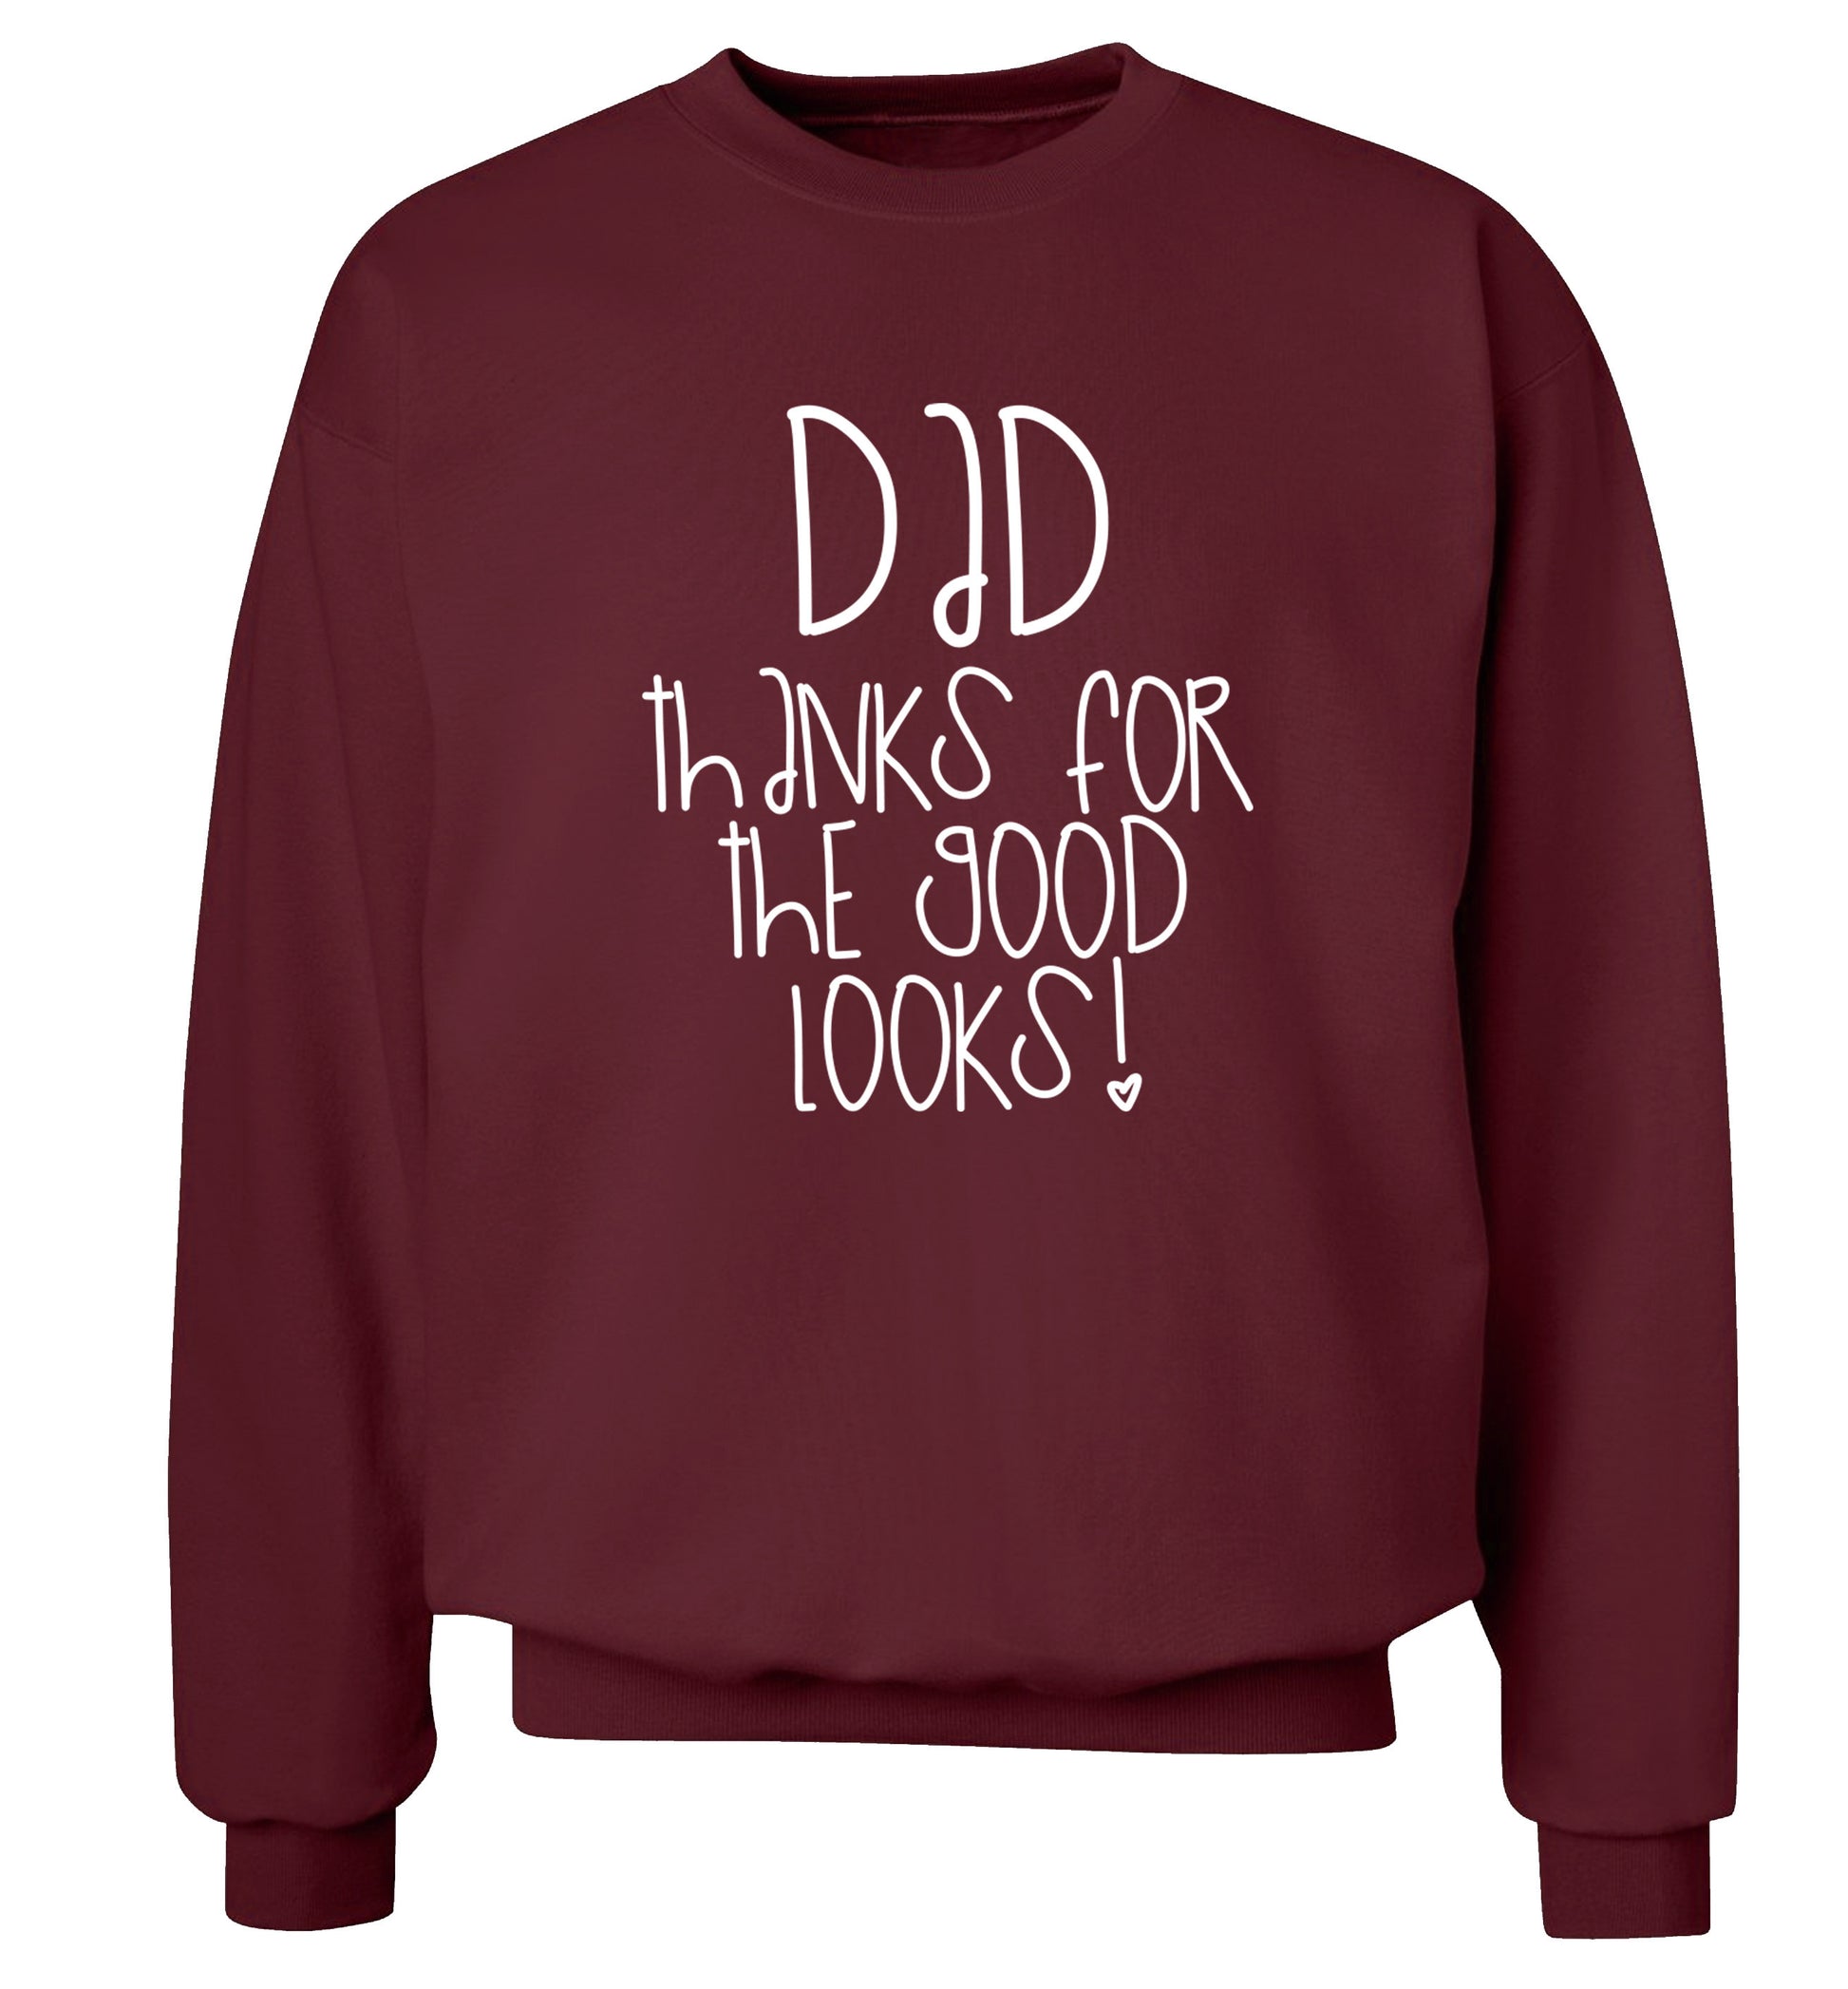 Dad thanks for the good looks Adult's unisex maroon Sweater 2XL